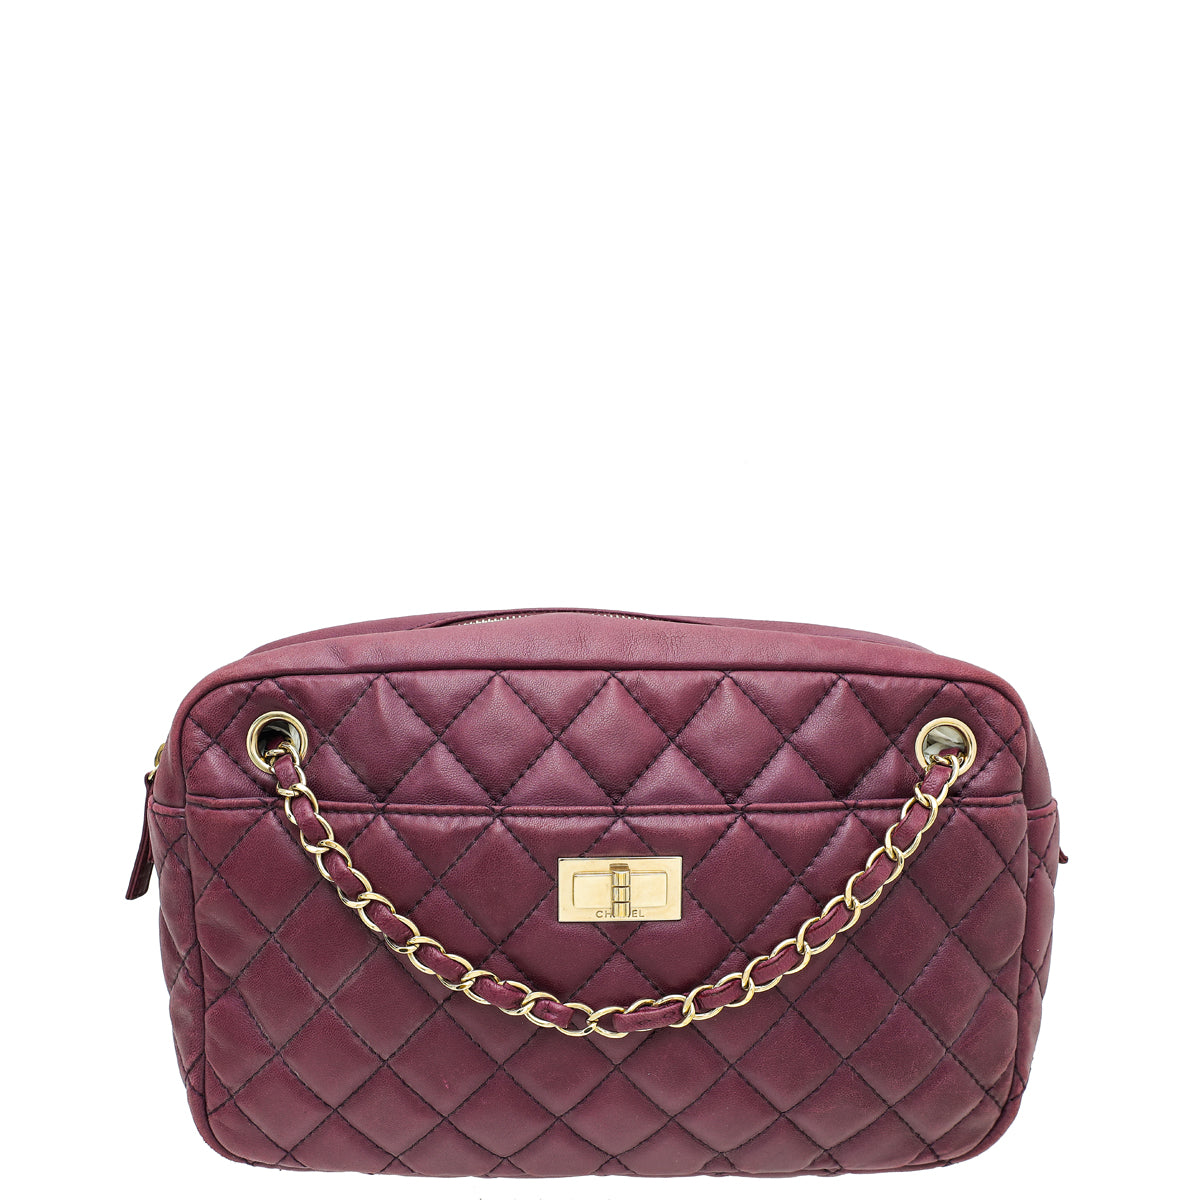 Chanel Violet Reissue Quilted Large Camera Bag